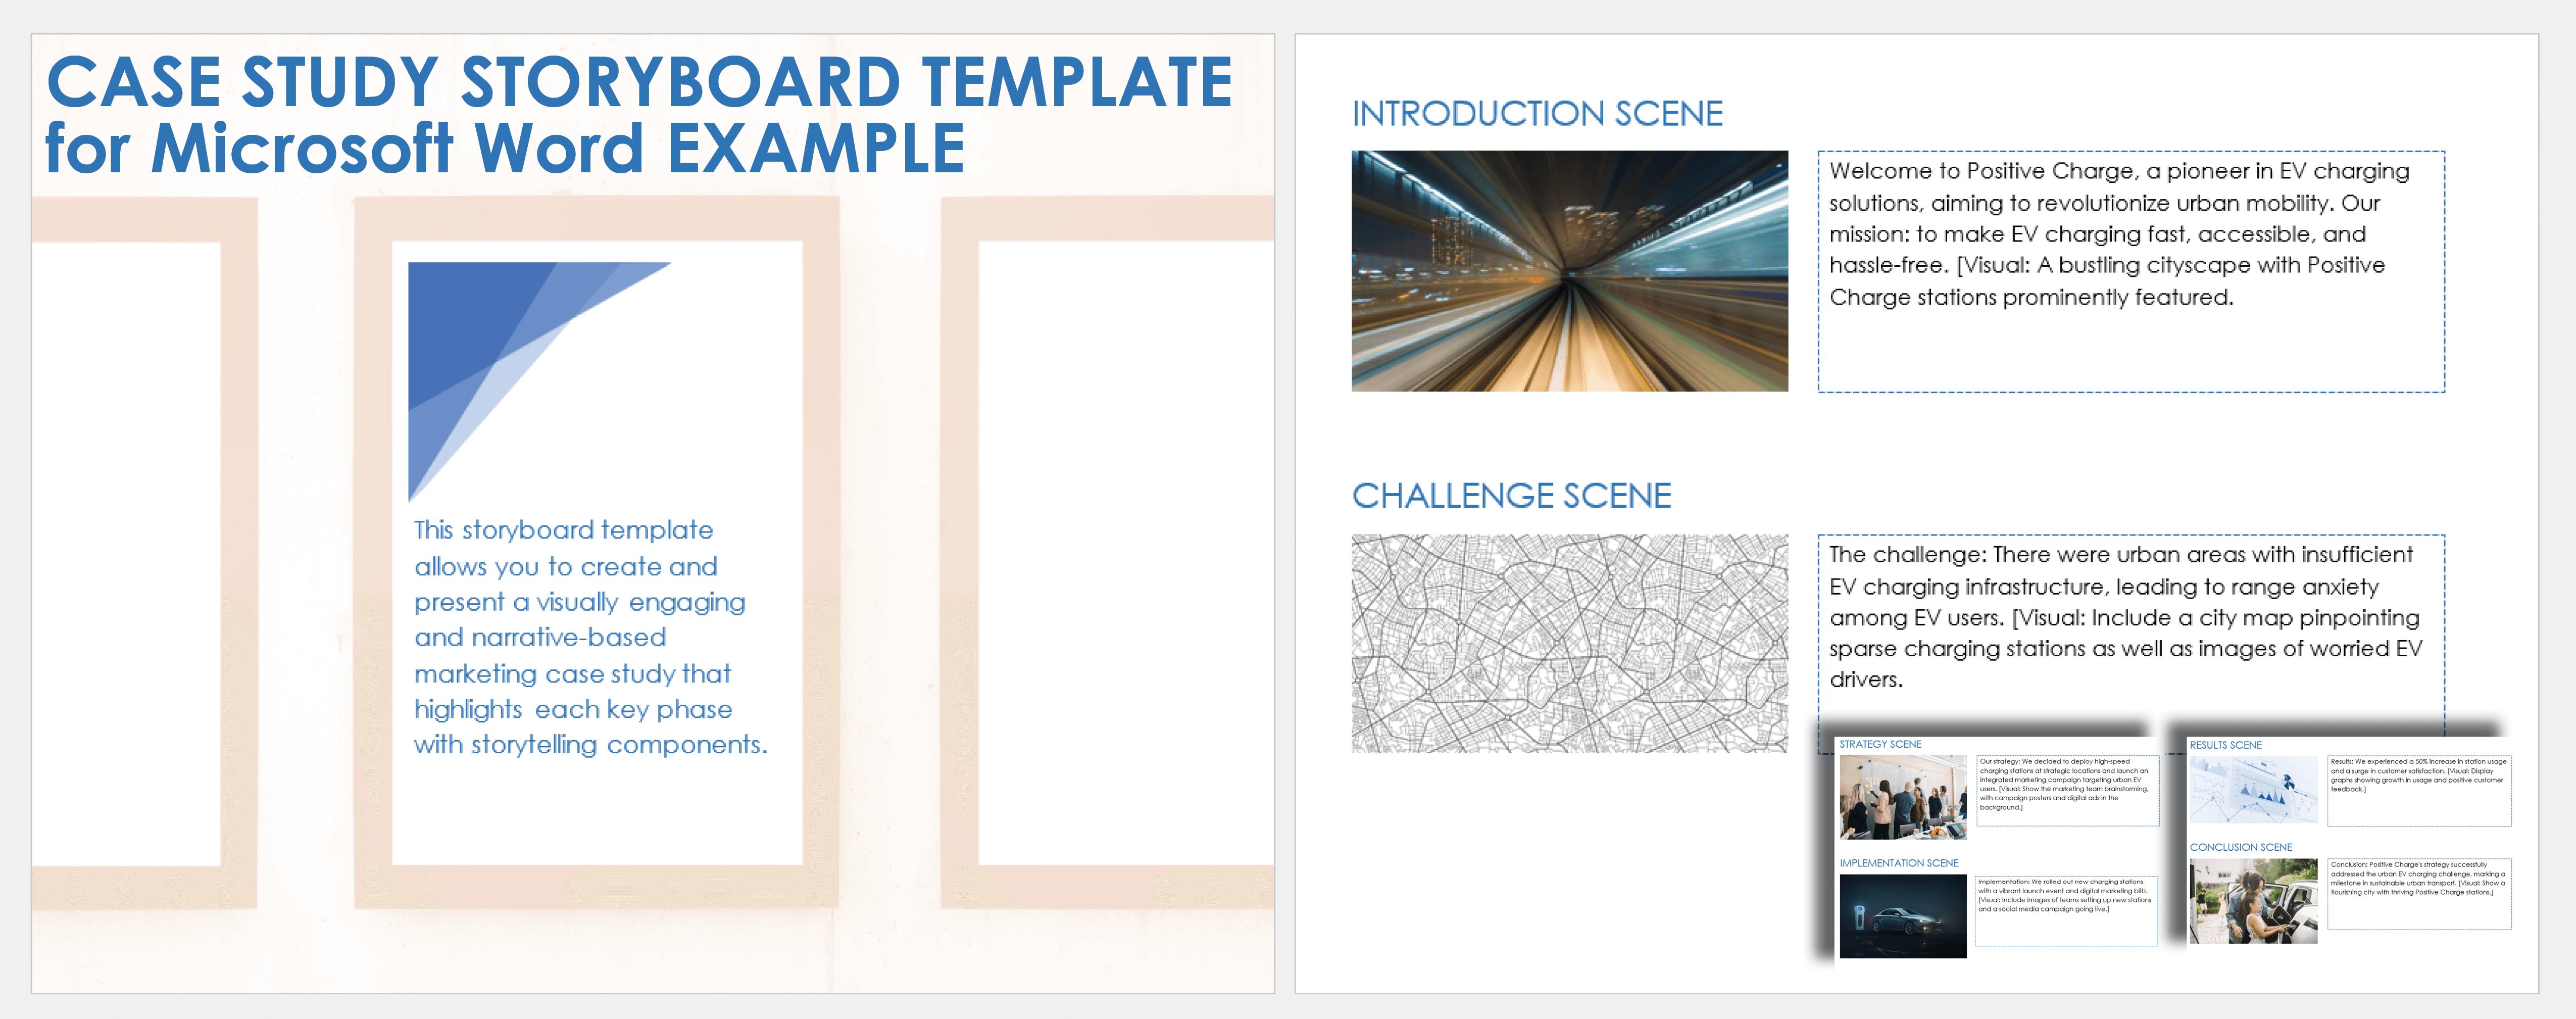 Case Study Storyboard Example Template for Microsoft Word